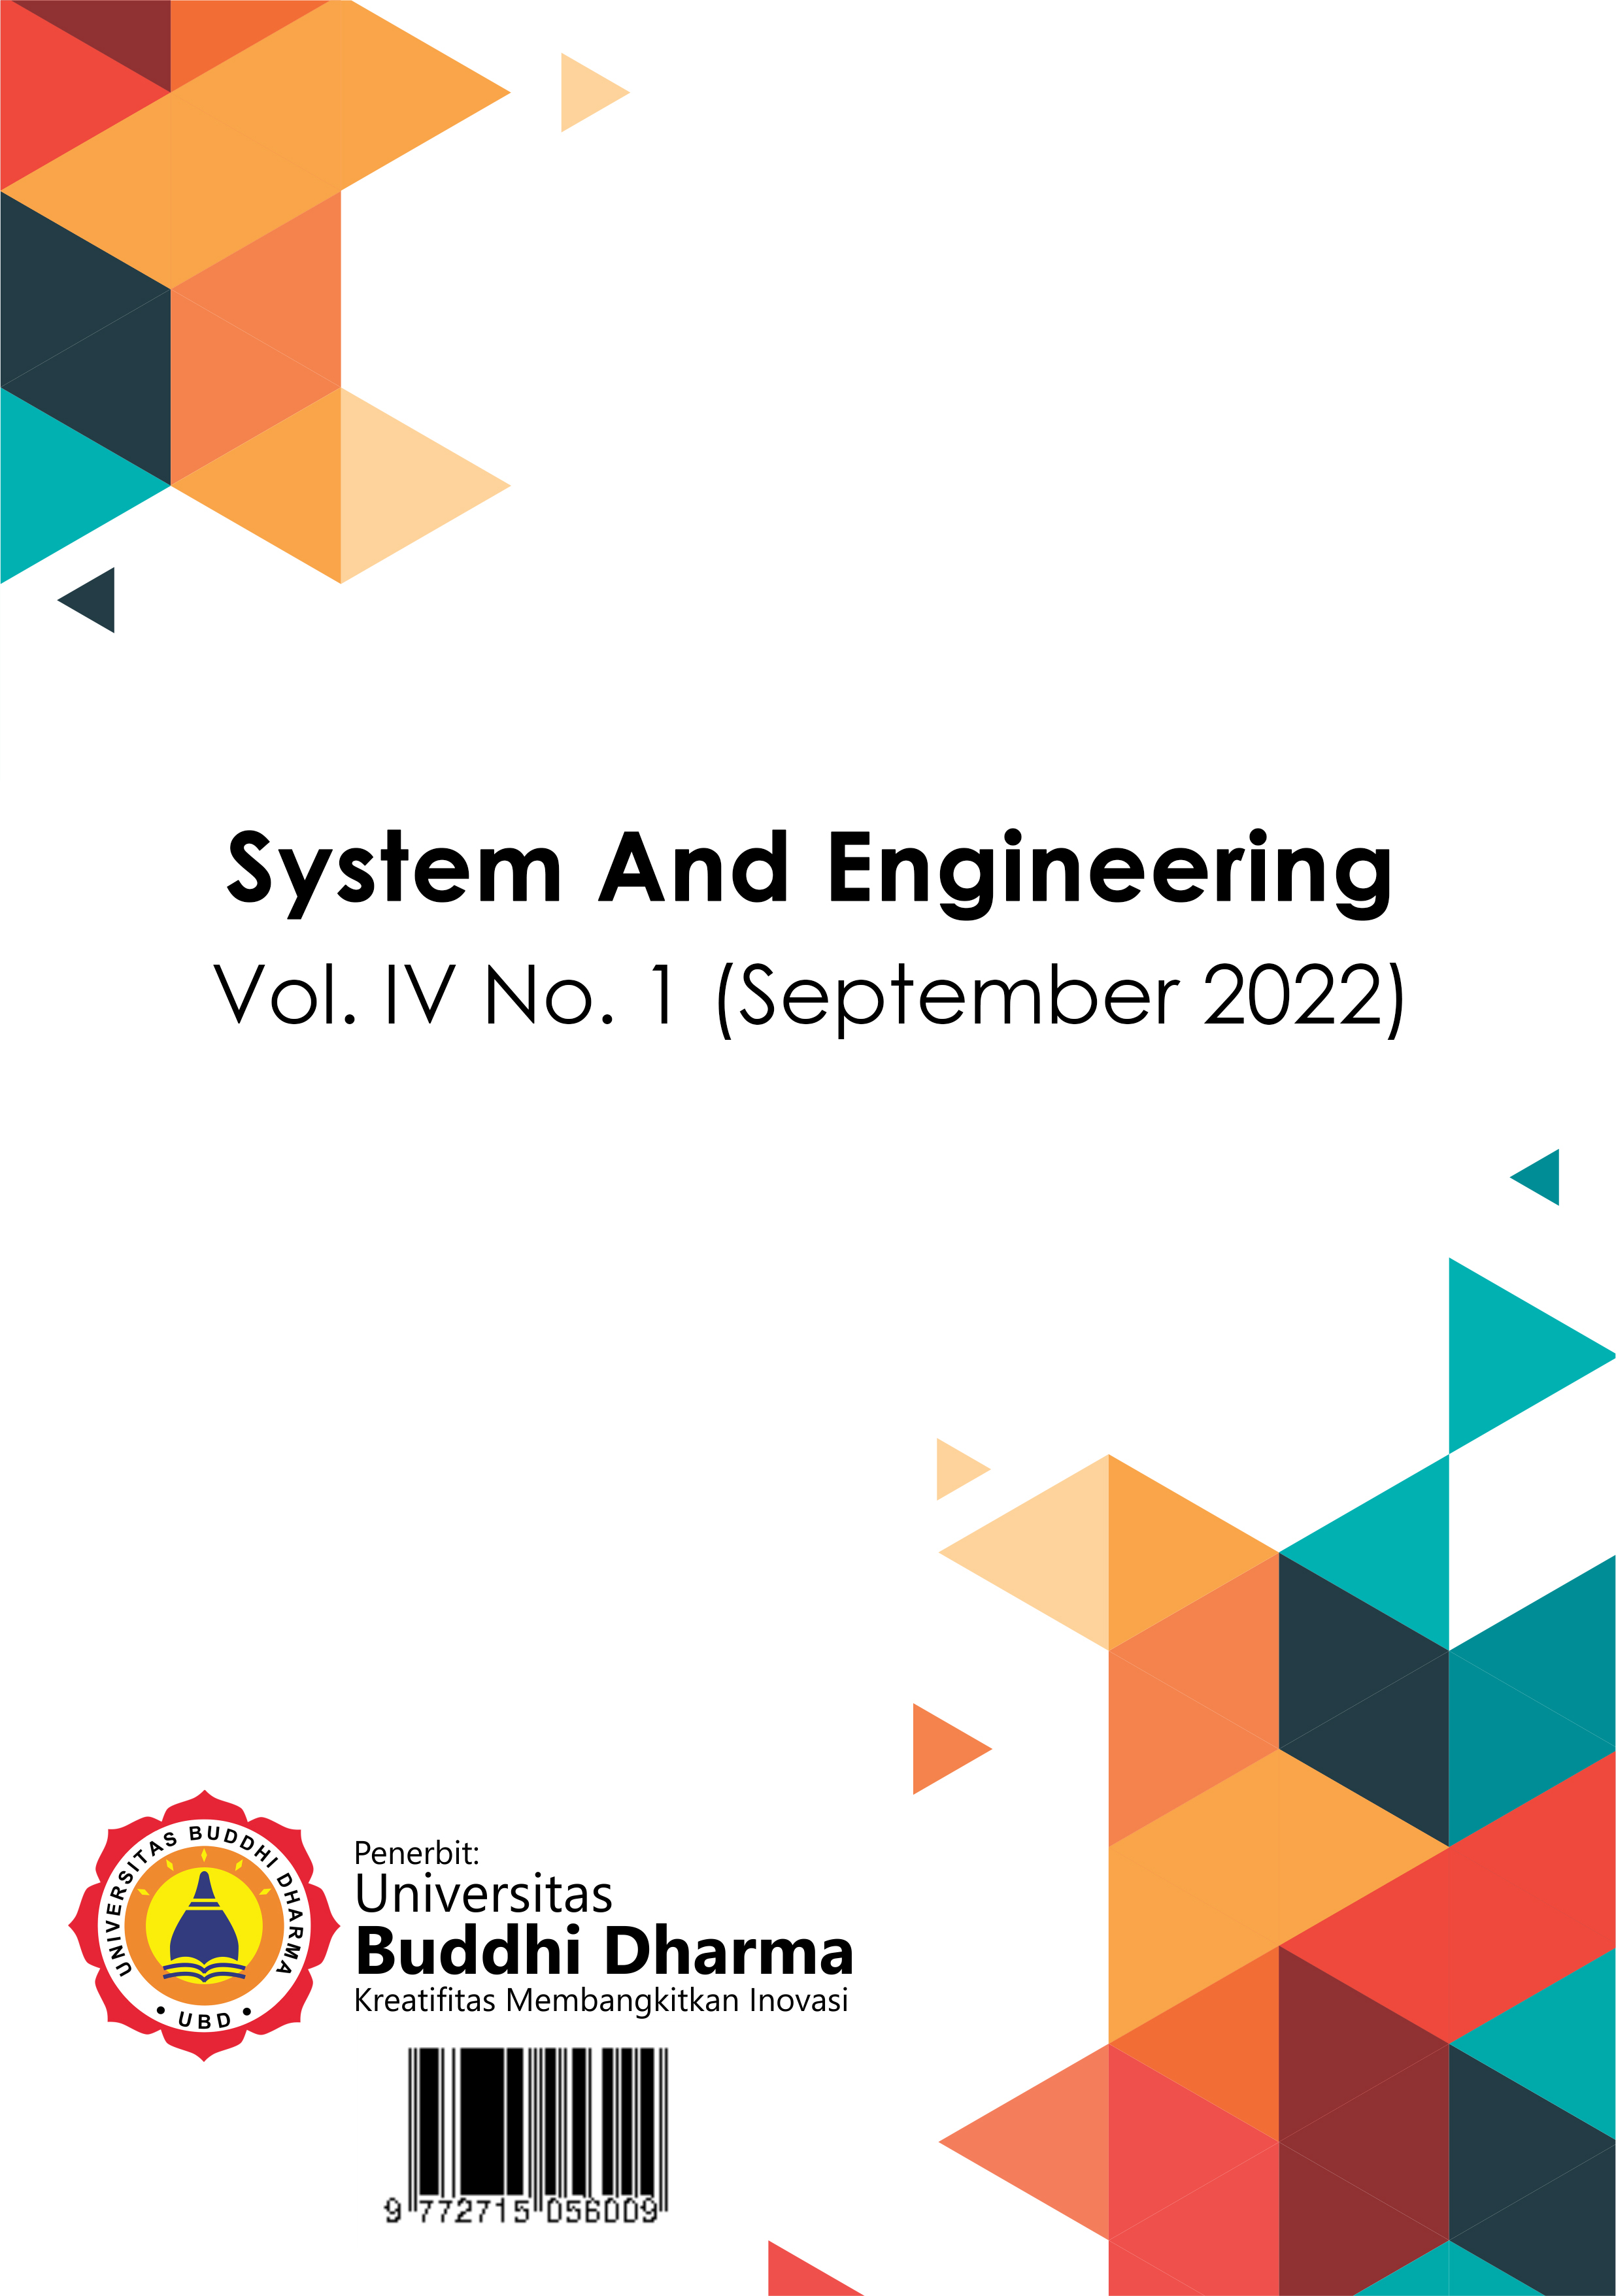 					View Vol. 4 No. 1 (2022): System and Engineering
				